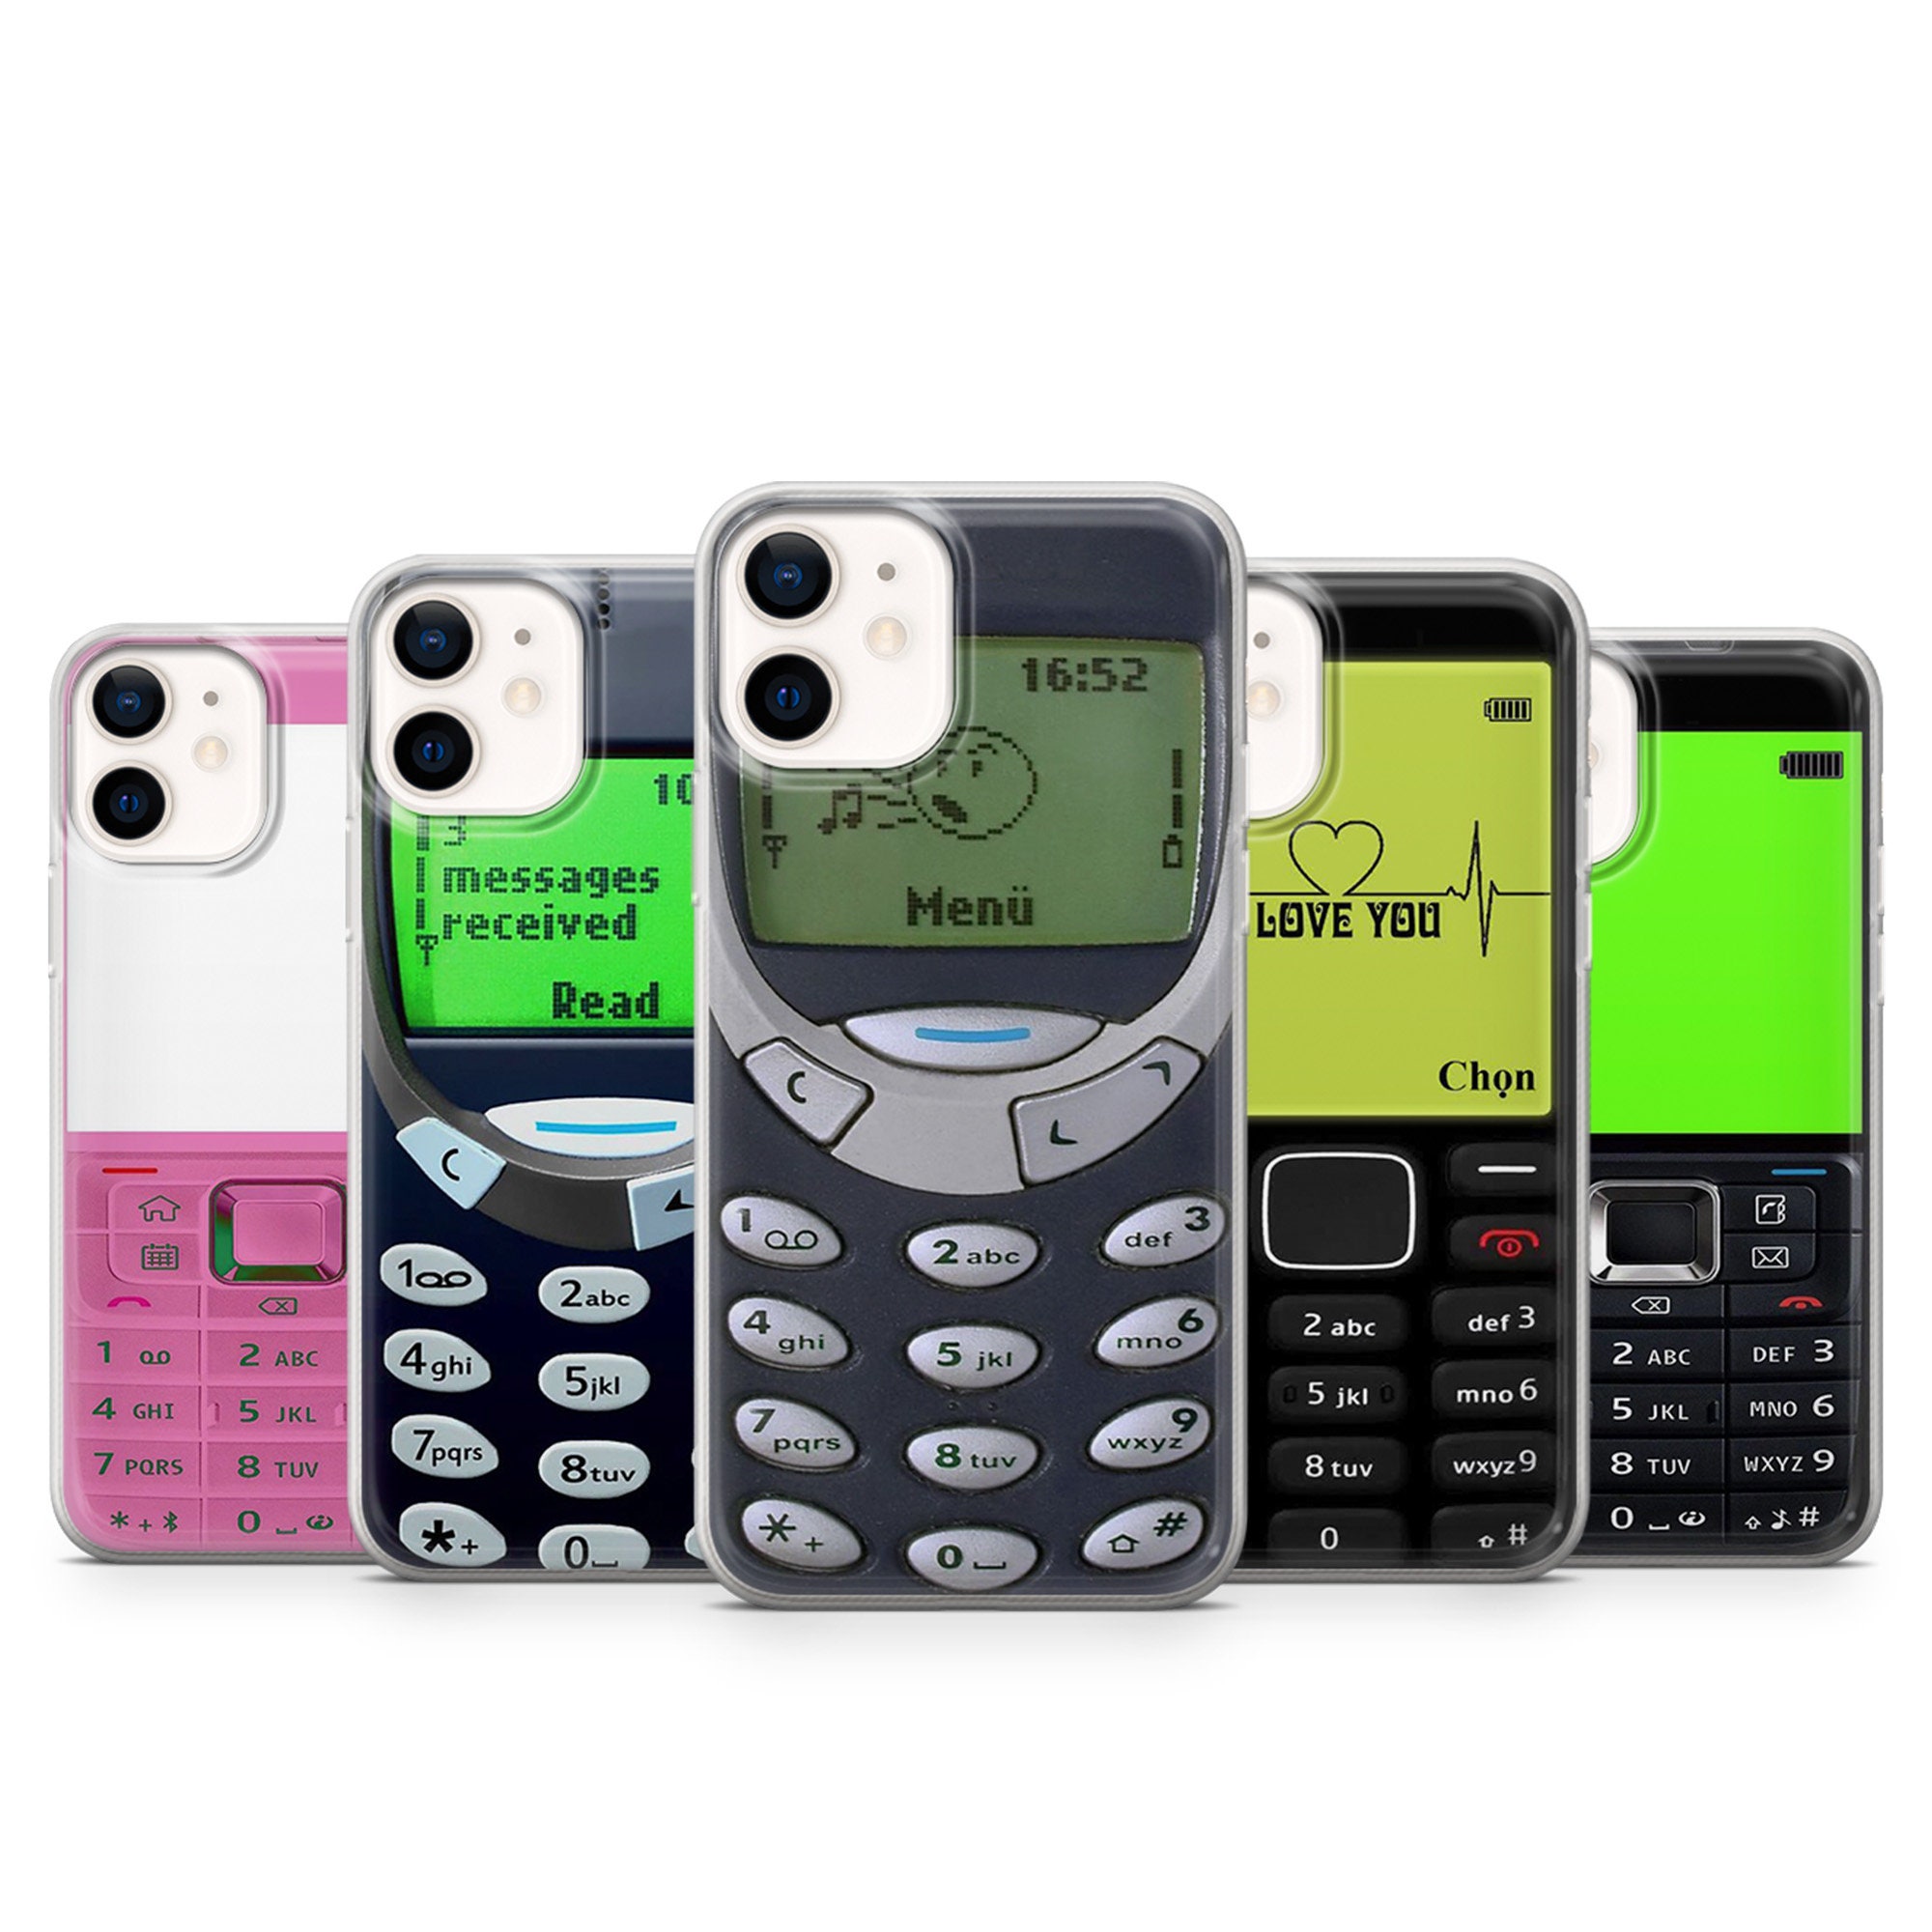 Classic Nokia phones are 33% off as it's Snake's 25th birthday